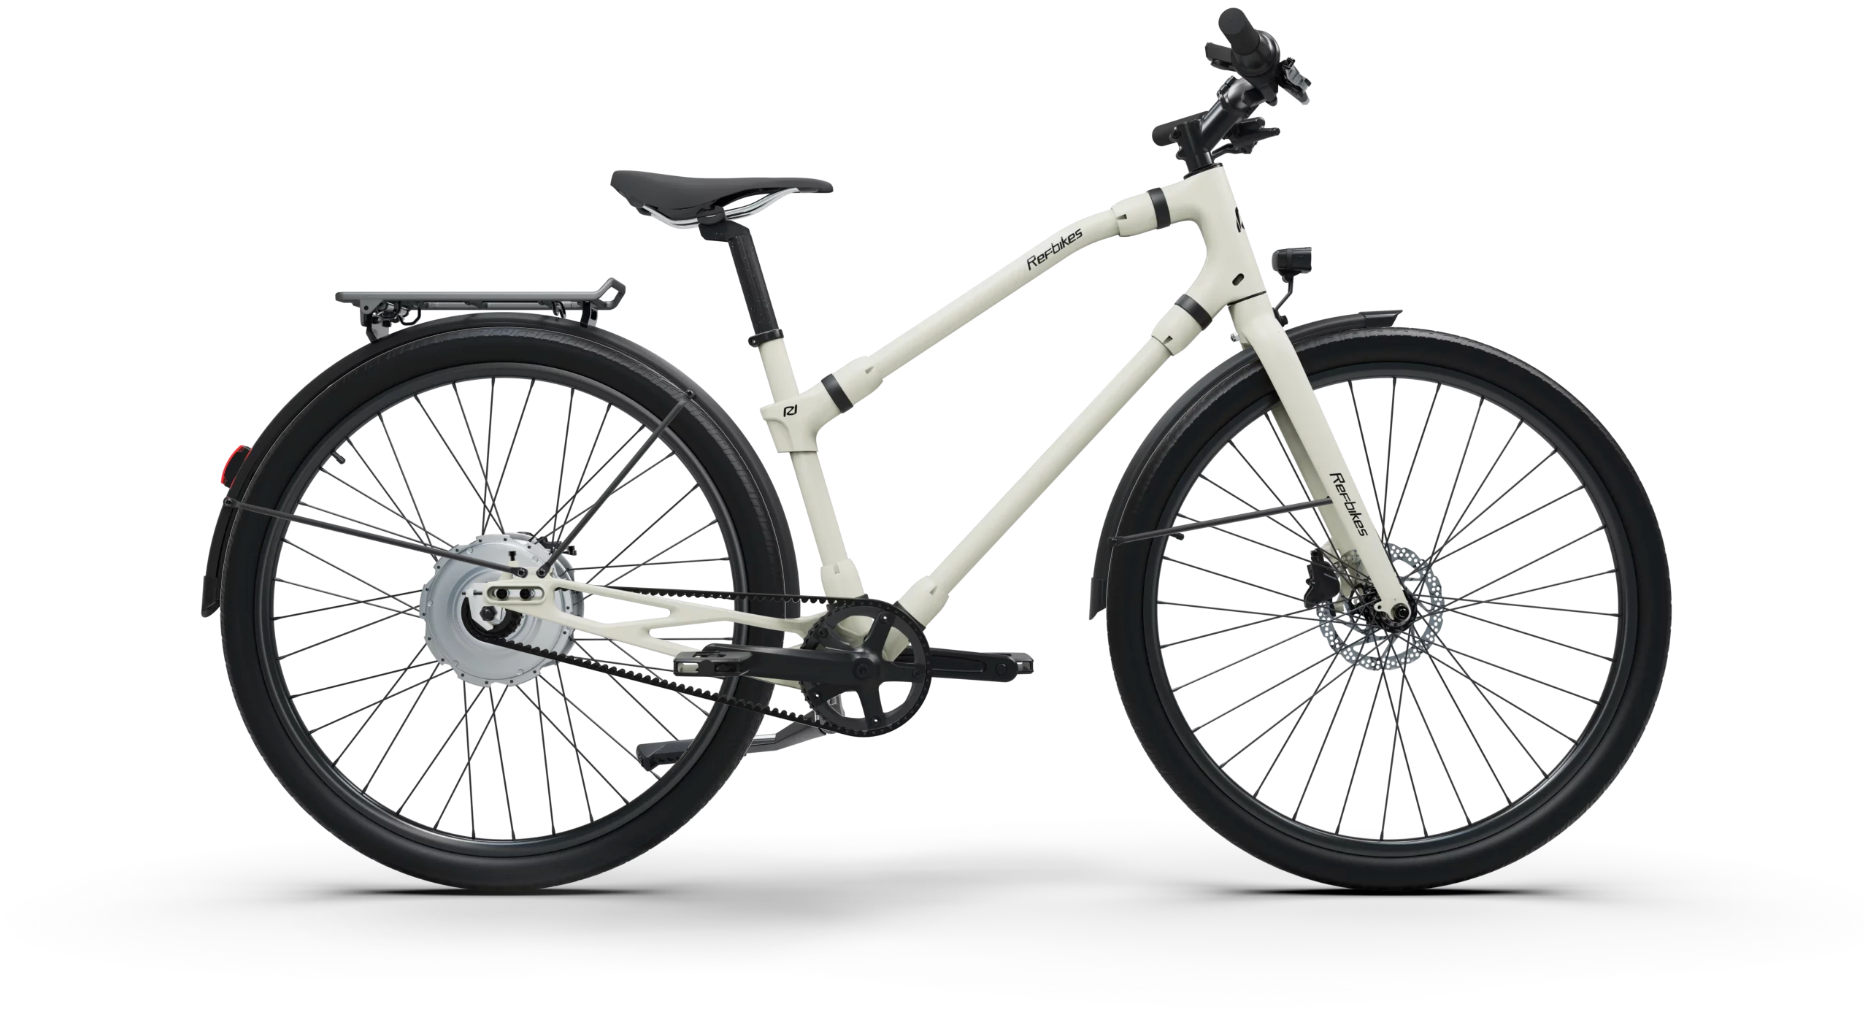 Elegant ivory-white Ref Urban Boost bike equipped with a powerful battery and comfortable saddle